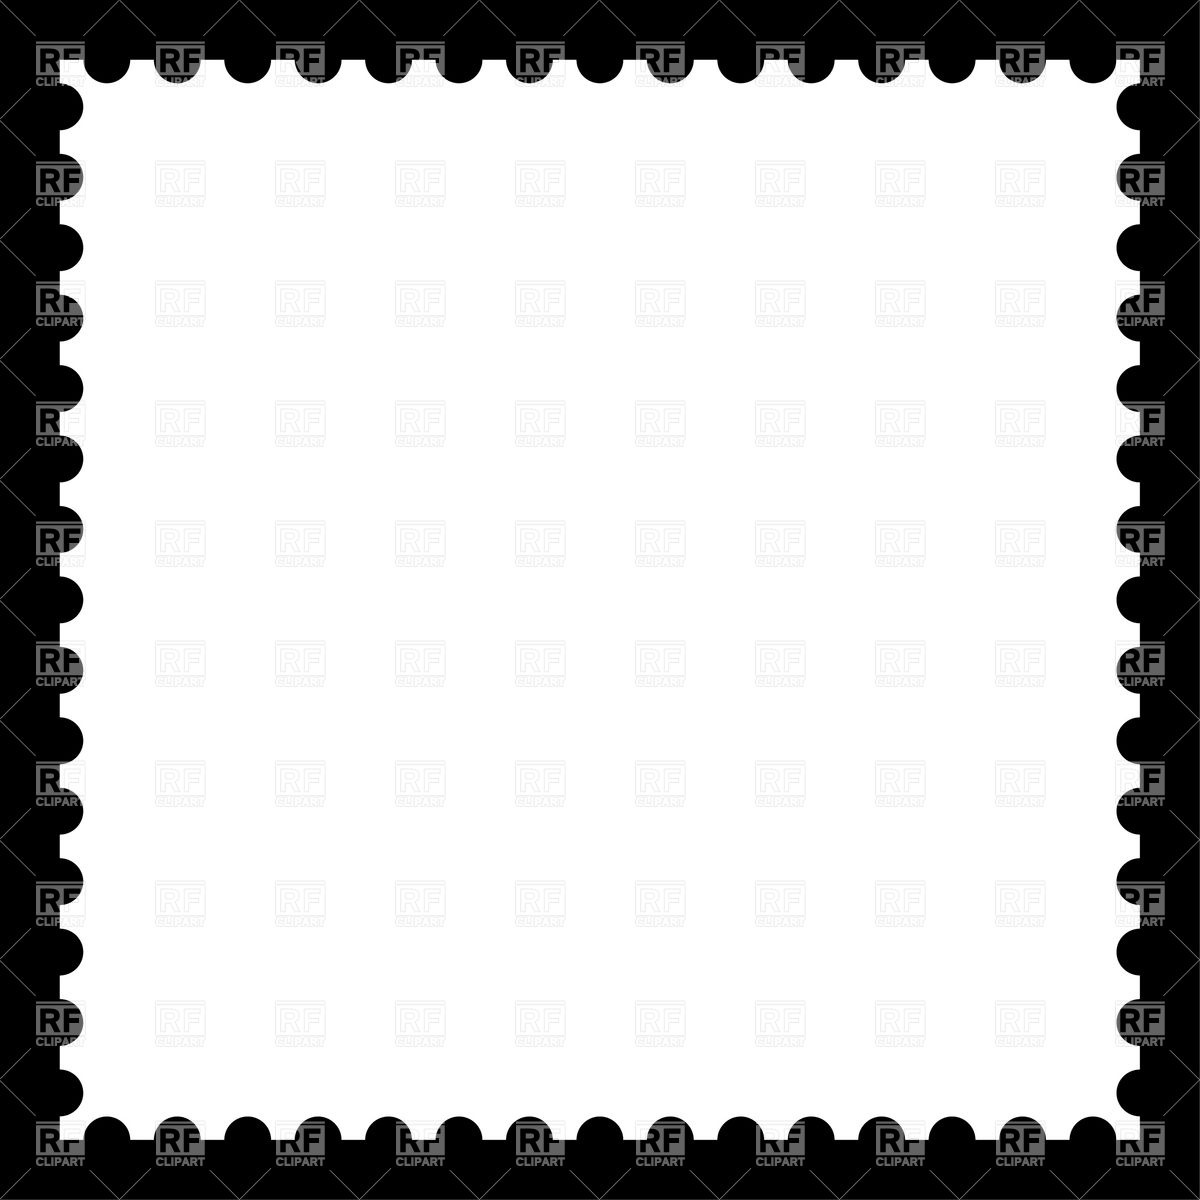 Blank Postage Stamp On Black Download Royalty Free Vector Clipart